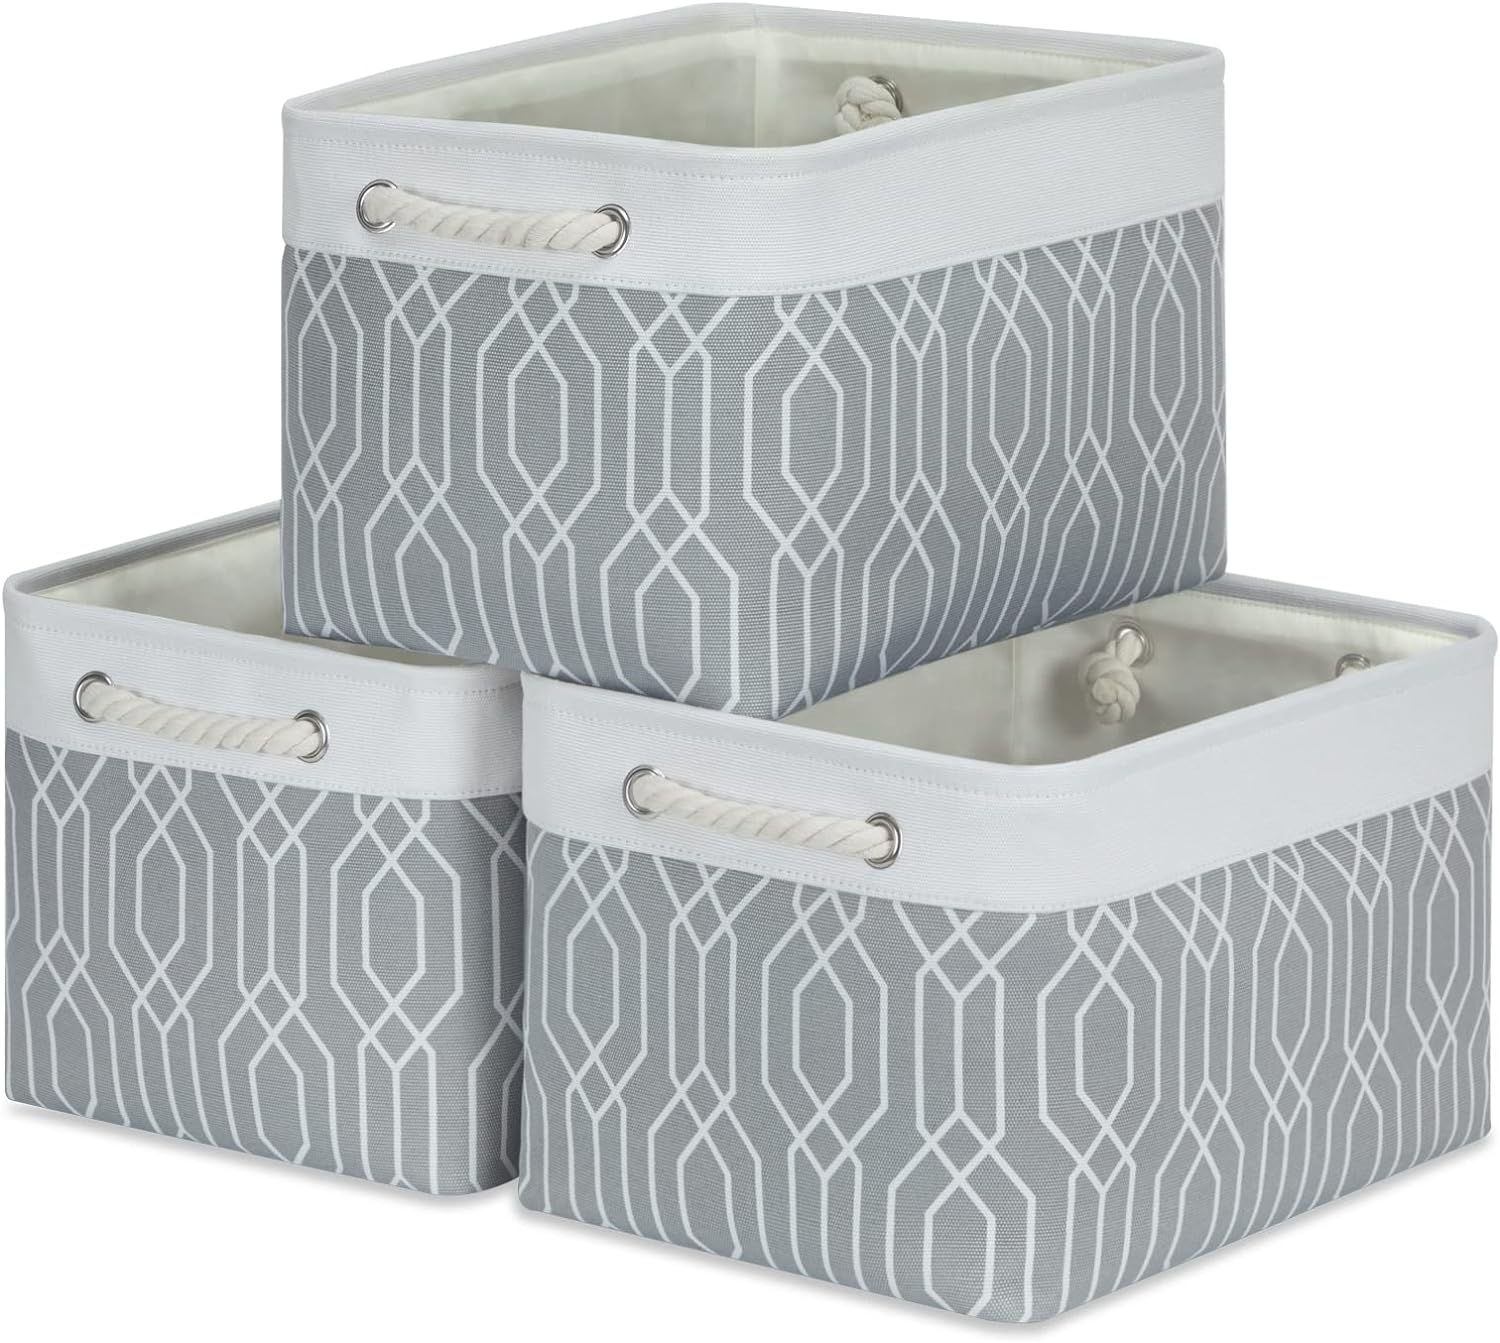 Temary Large Storage Baskets Cloth Basket for Shelves 3Pack Collapsible Decorative Storage Organizer Baskets Storage Bins with Handles for Nursery, Office, Home(Grey Polygon,15Lx11Wx9.5H Inches)